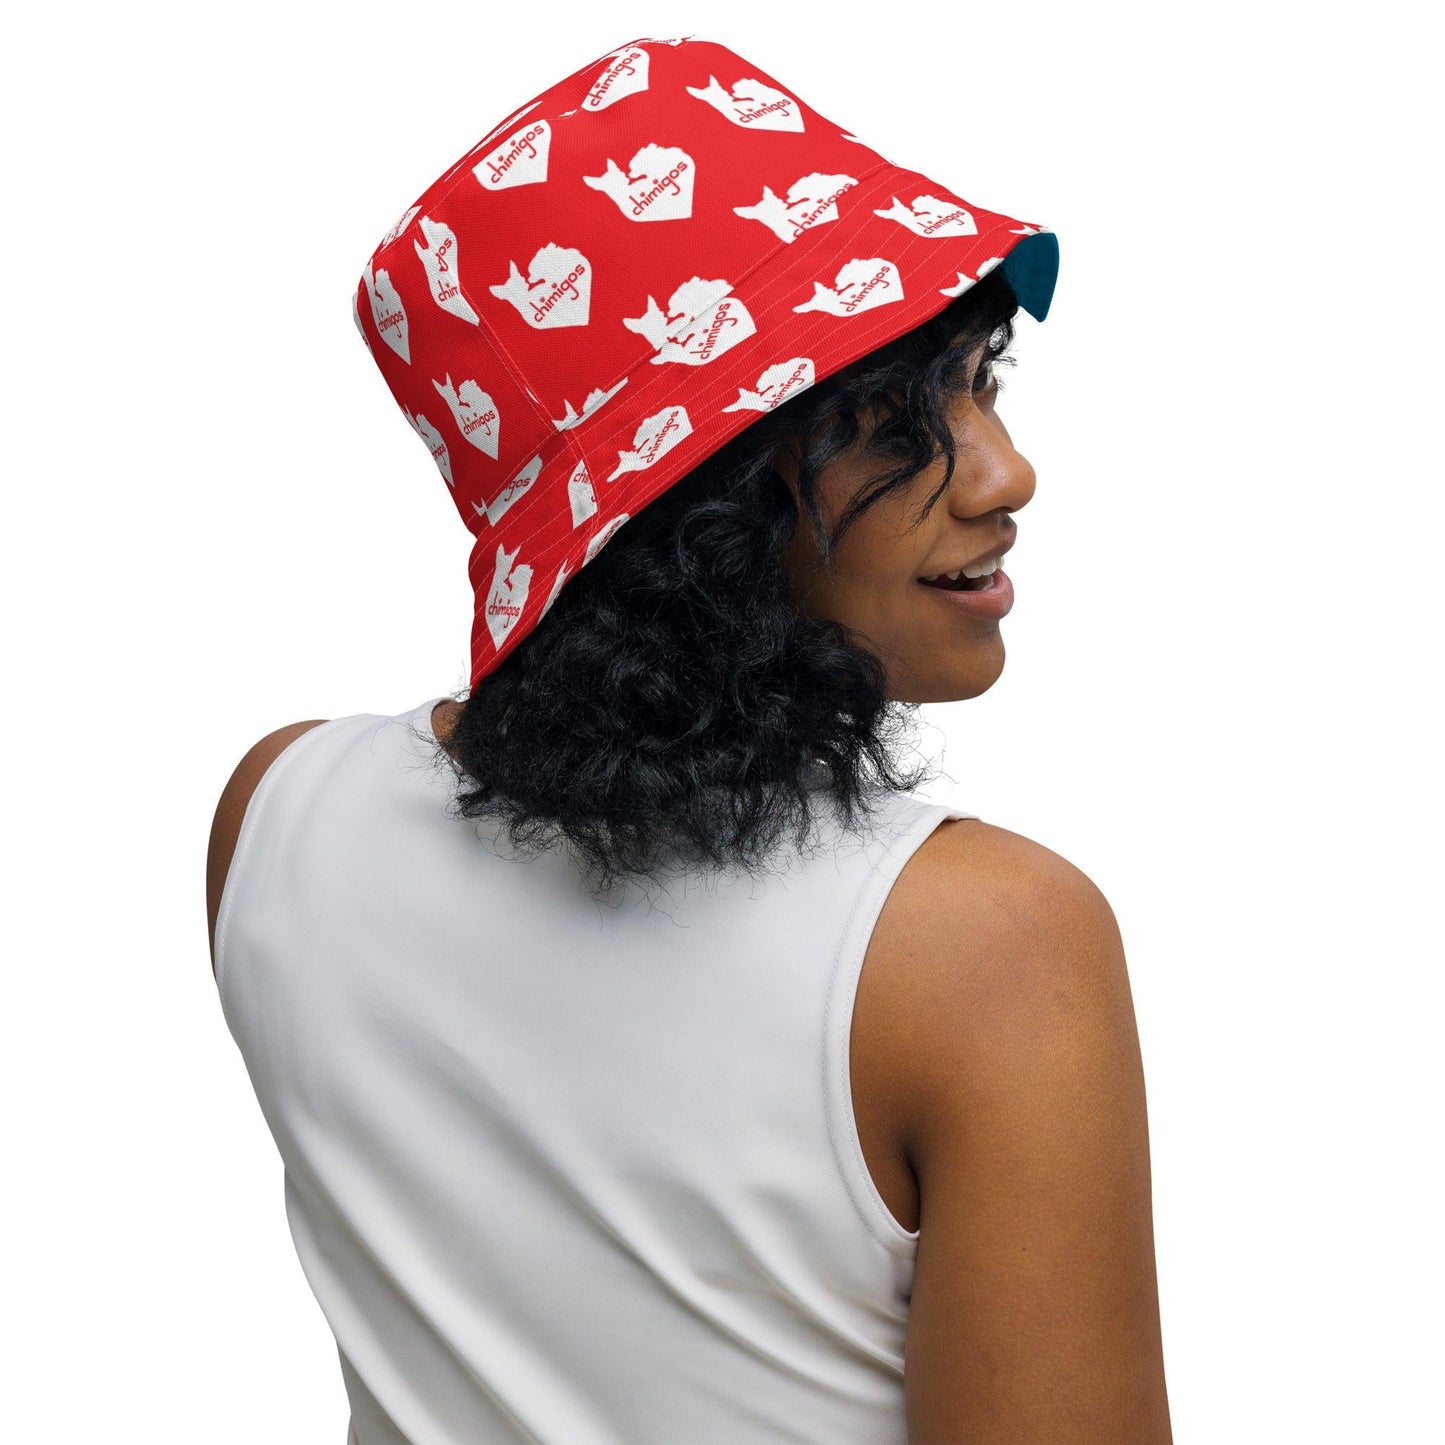 Chihuahua + Shark = Chark reversible bucket hat. Blue outer with black silhouette of a longhaired chihuahua with the face of a great white shark + "Chark" in red cursive font, and another shark-faced chihuahua silhouette running on the brim, below a dictionary entry of the noun "chark": a chihuahua with teeth like a shark. Red inner scattered with white cute love heart Chimigos logos. Unisex in two sizes. Design by Renate Kriegler, owner of Chimigos - for the love of chihuahuas. More on chimigos.com